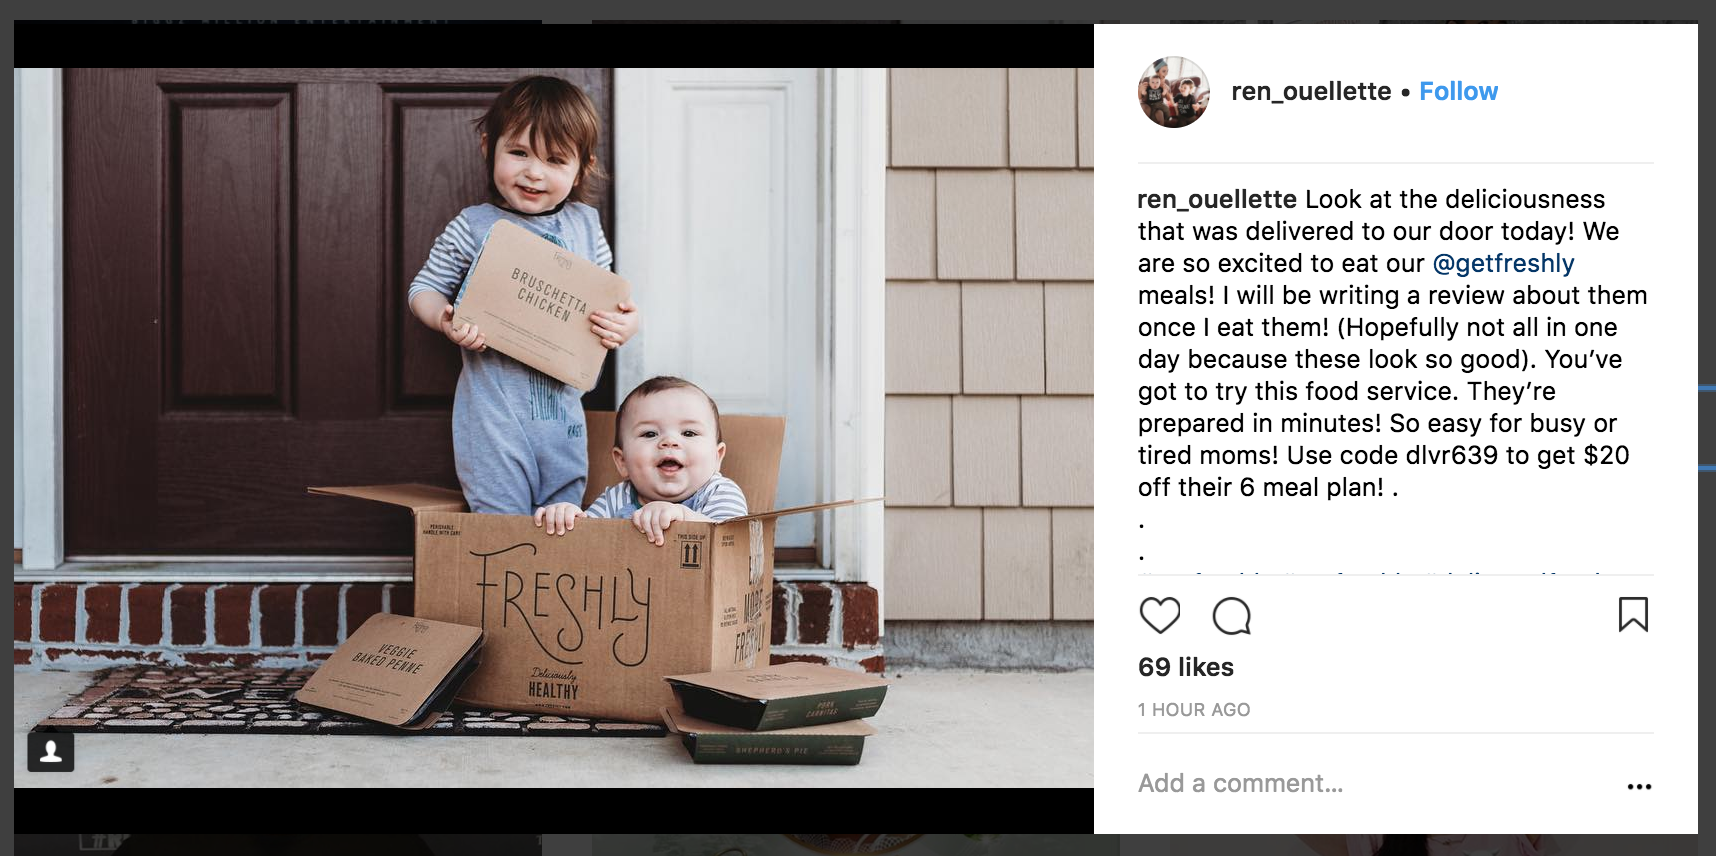 How to Run Instagram Sponsored Posts Without Getting Slapped by the FTC